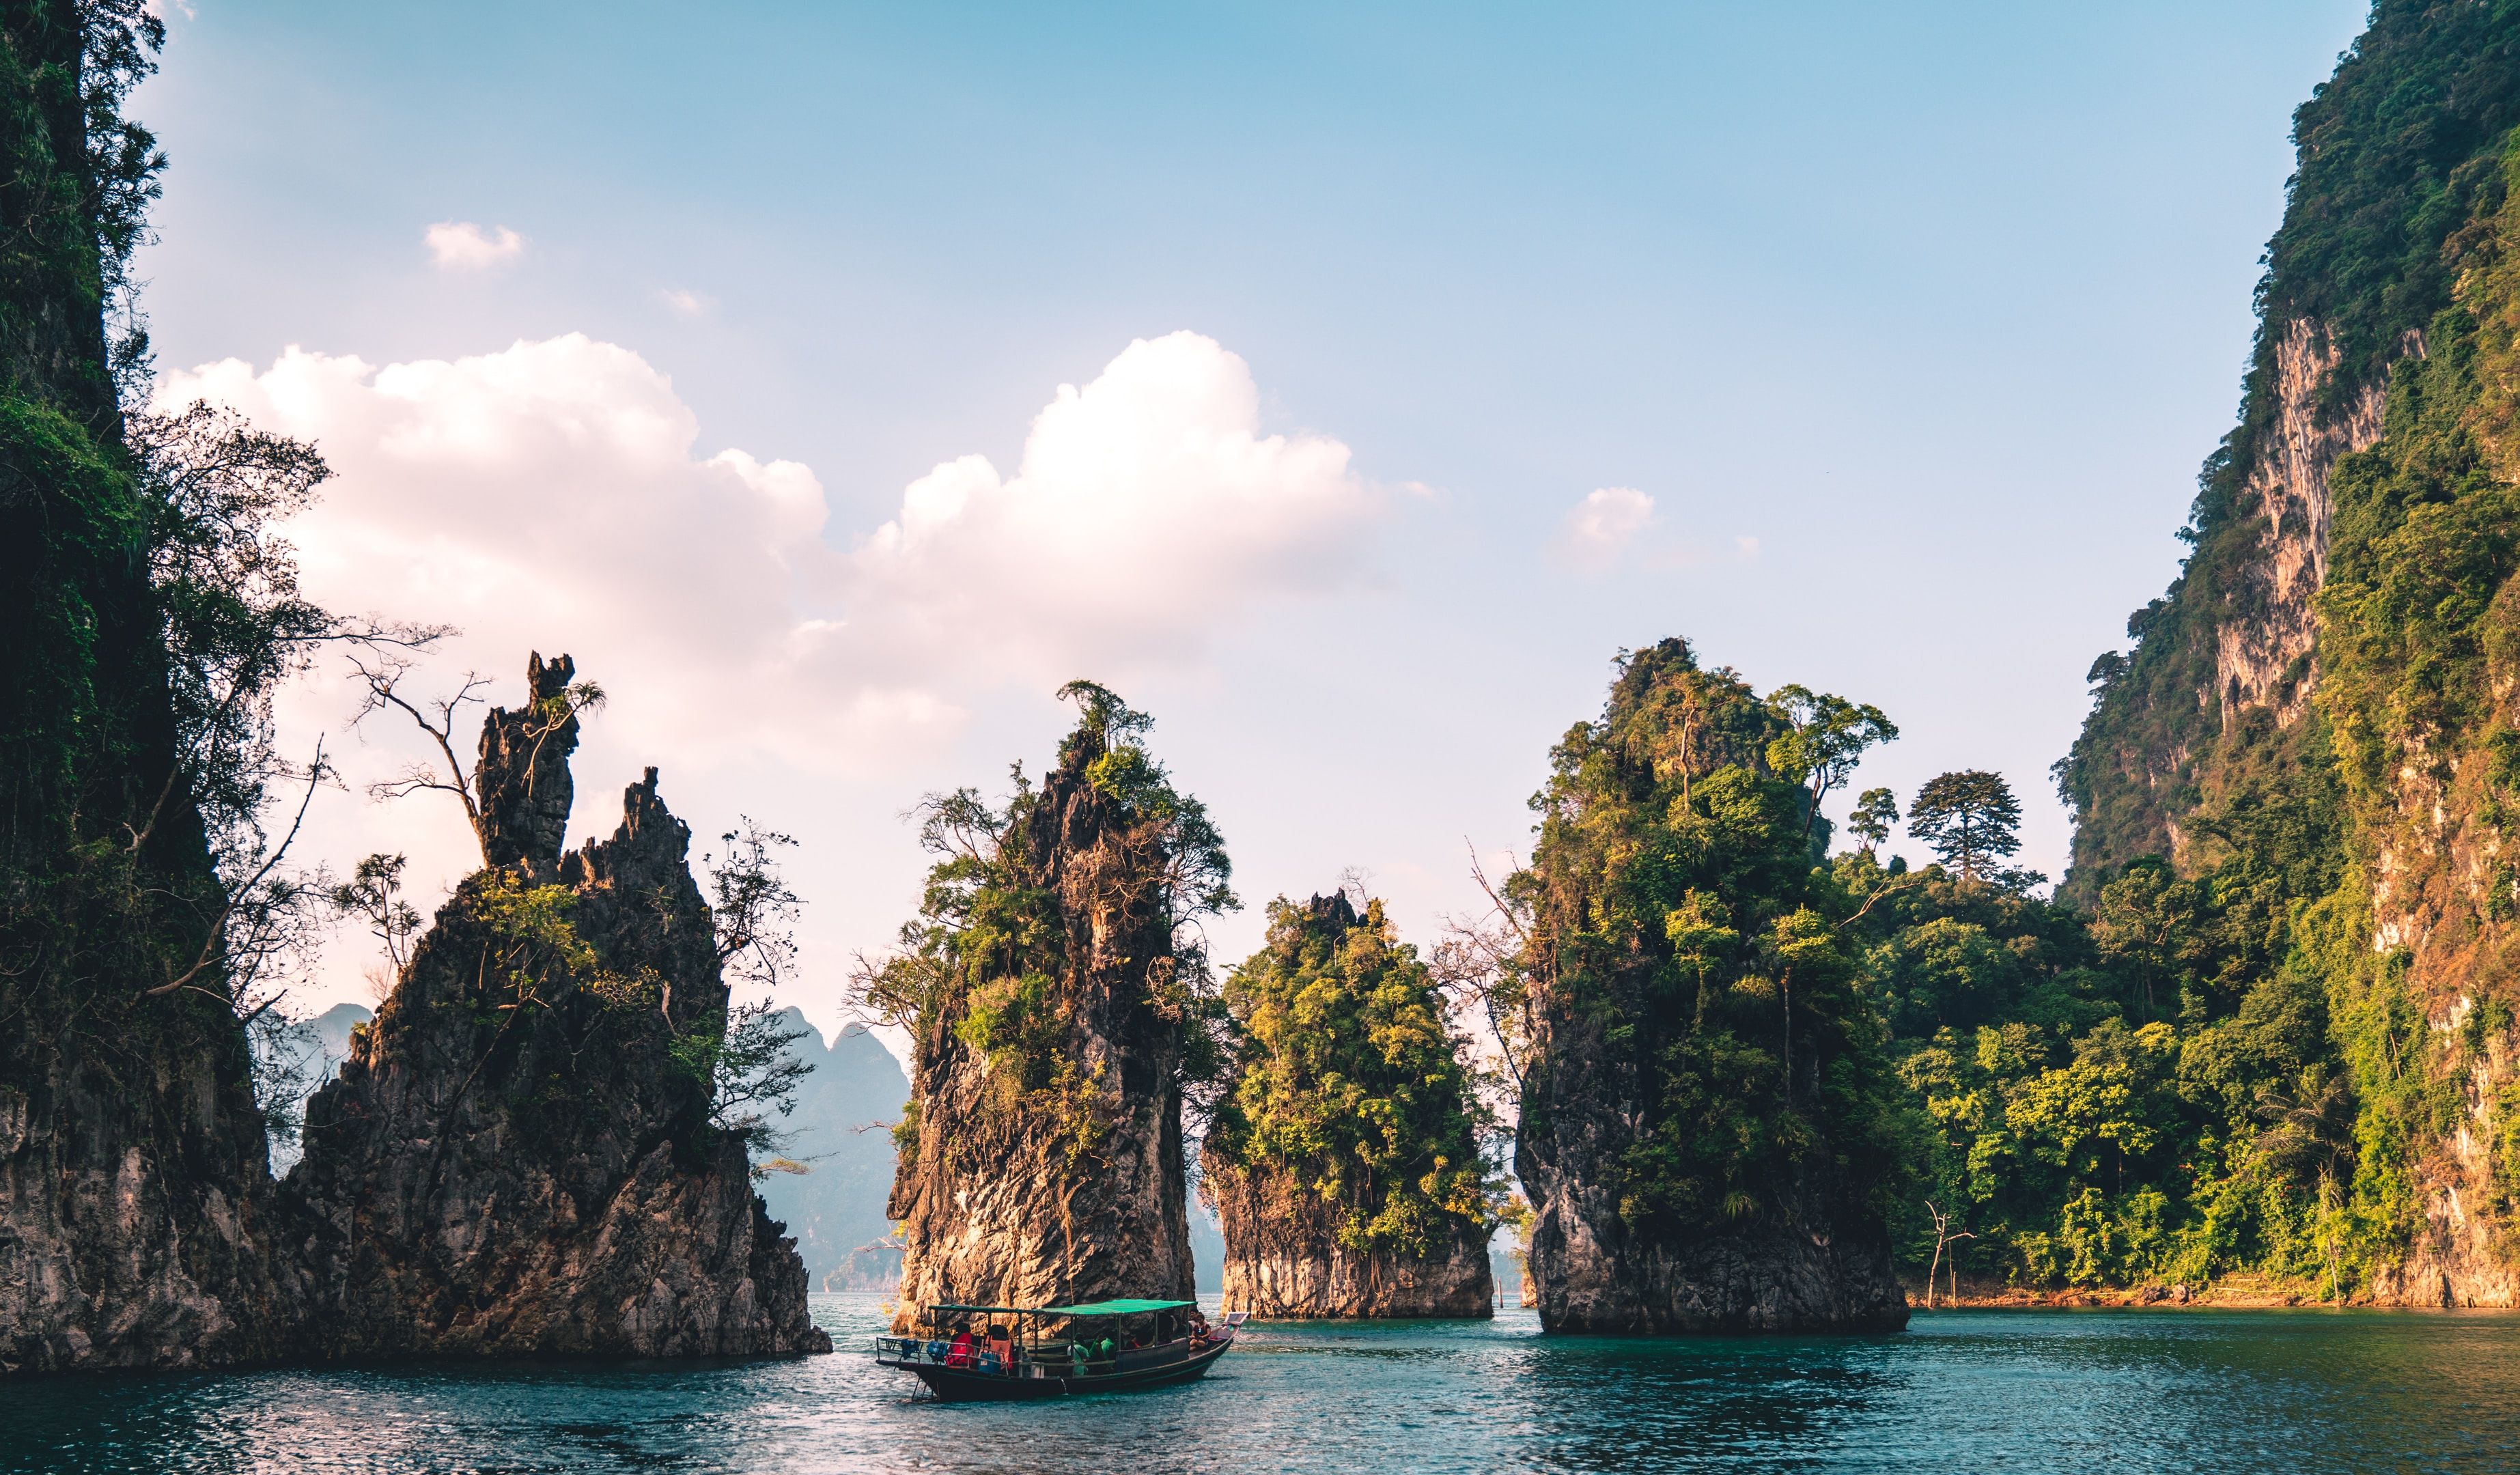 Dramatic rock formations emerge from the waters in Khao Sok National Park, Thailand 